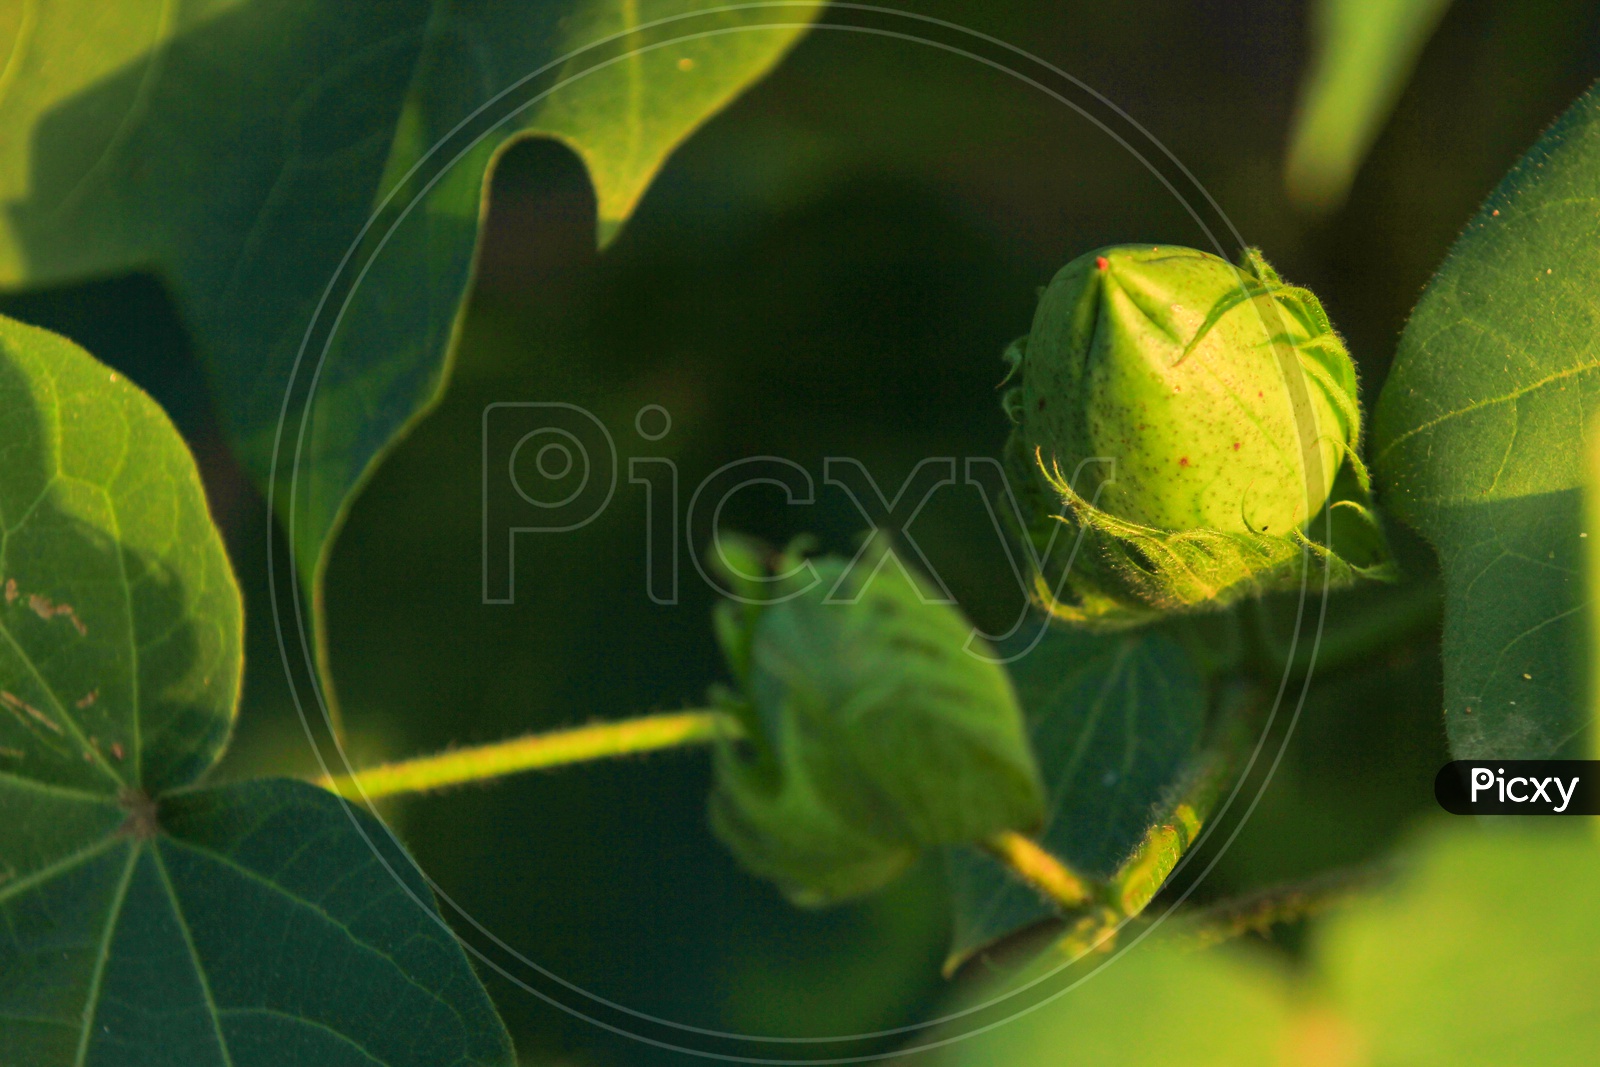 Green Raw Cotton Ball Growing in Field Close Up Shot